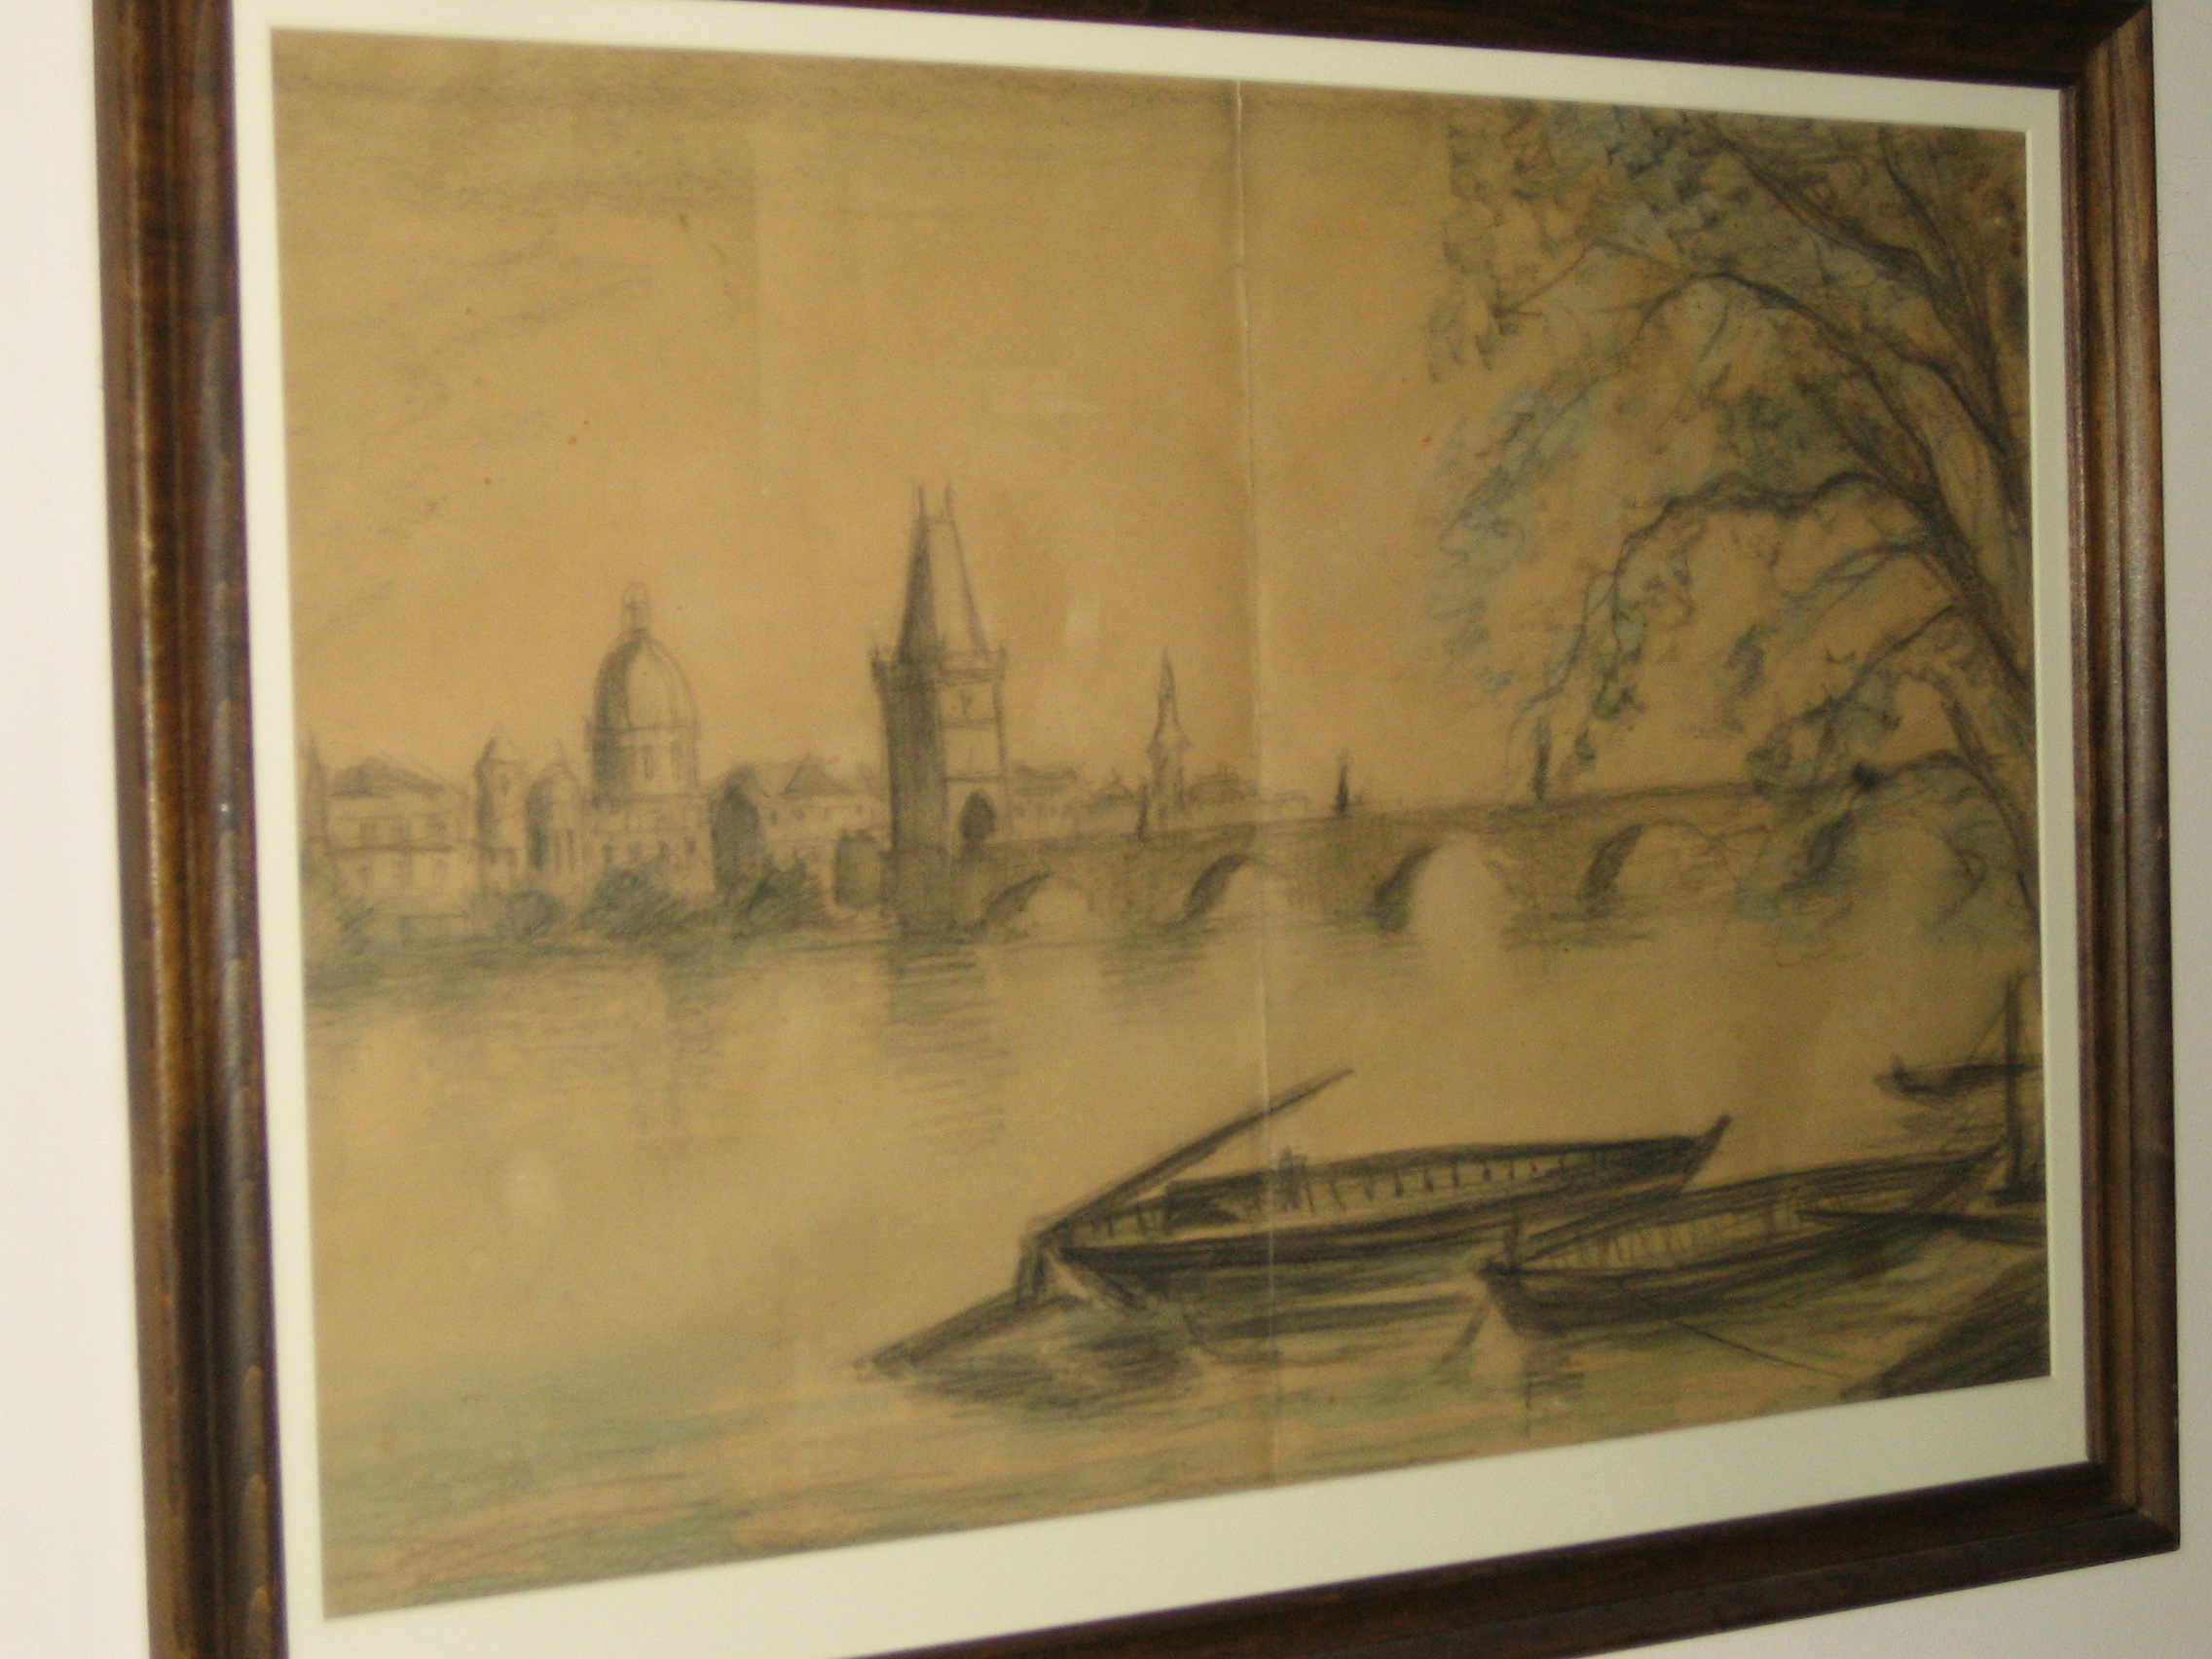 Framed drawing of a landscape of a river with a bridge, canoes and distant buildings 